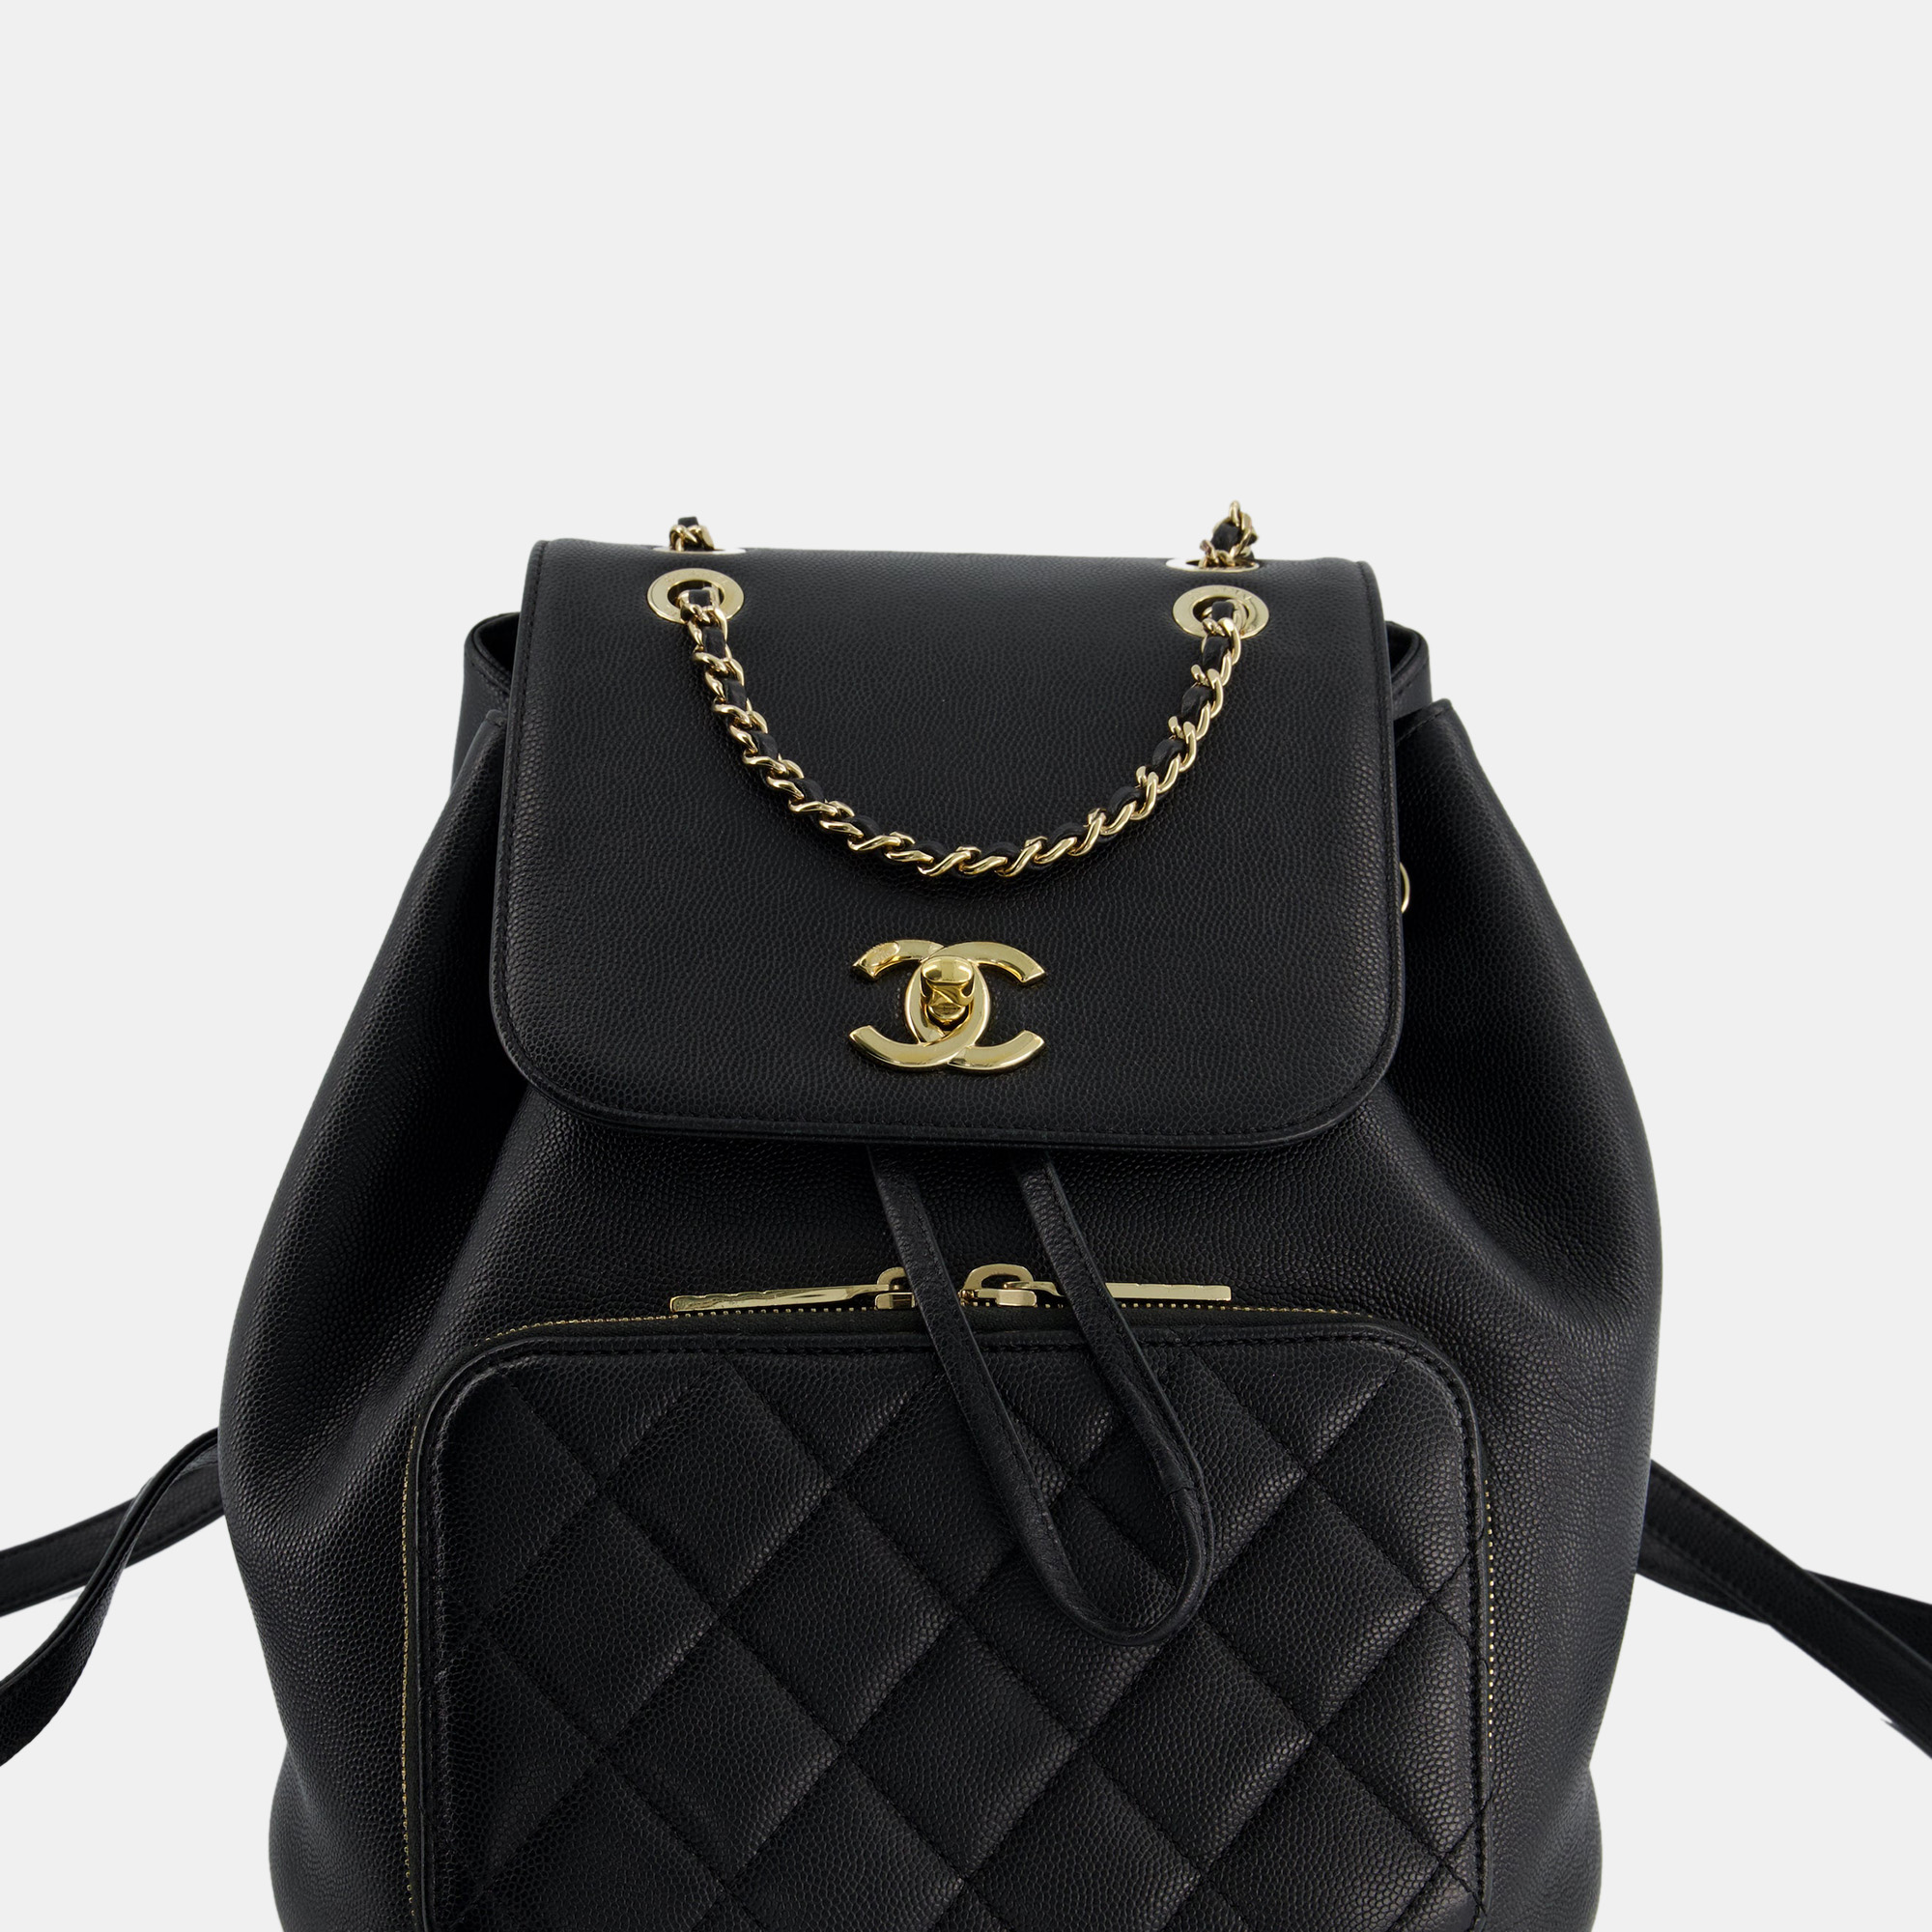 Chanel CC Black Caviar Leather Backpack Bag With Champagne Gold Hardware